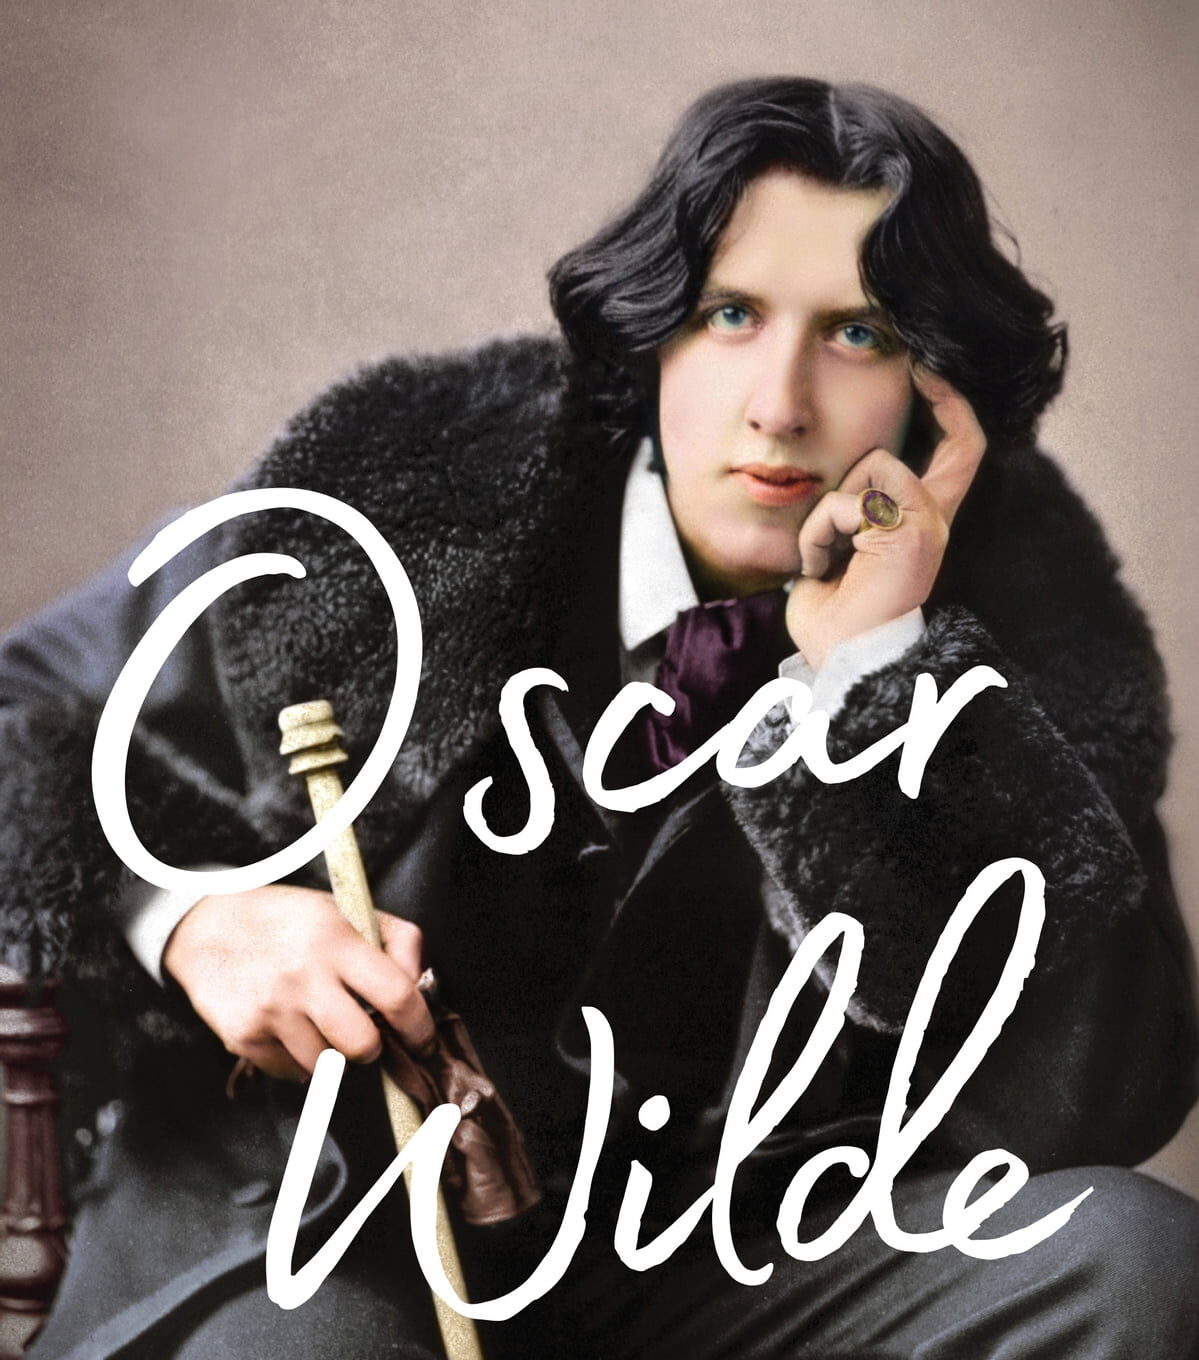 Top Quotes by Oscar Wilde